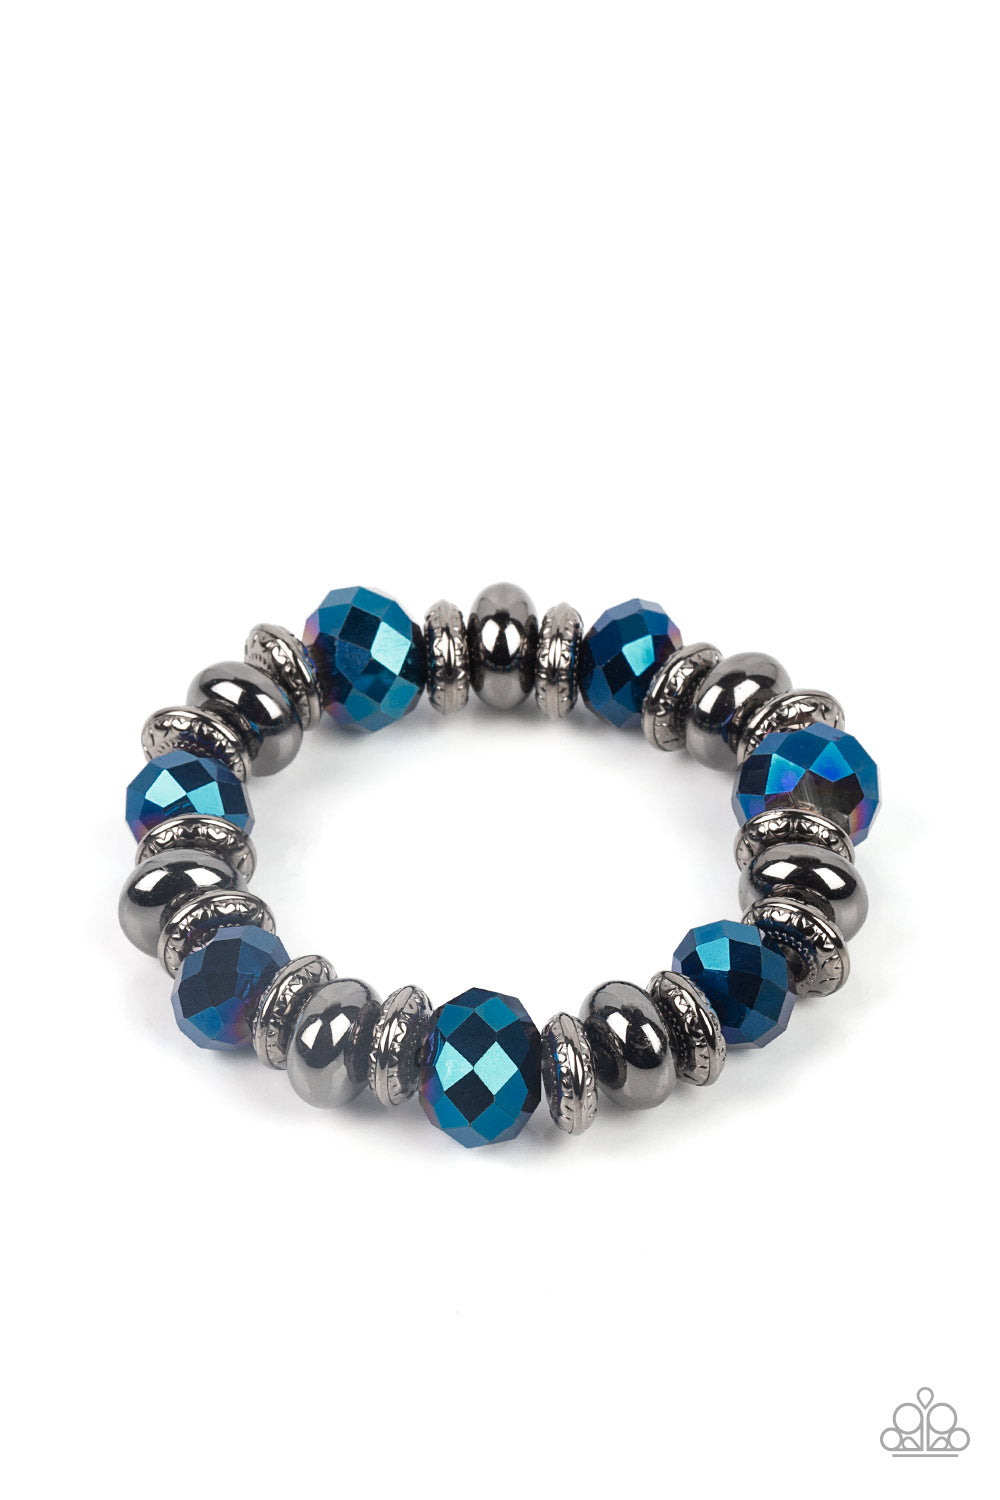 Power Pose Blue Bracelet - Paparazzi Accessories  An oversized assortment of textured gunmetal rings, smooth gunmetal beads, and metallic blue crystal-like beads are threaded along stretchy bands around the wrist for a glitzy finish.  Sold as one individual bracelet.  Get The Complete Look! Necklace: "Interstellar Influencer - Blue" (Sold Separately)